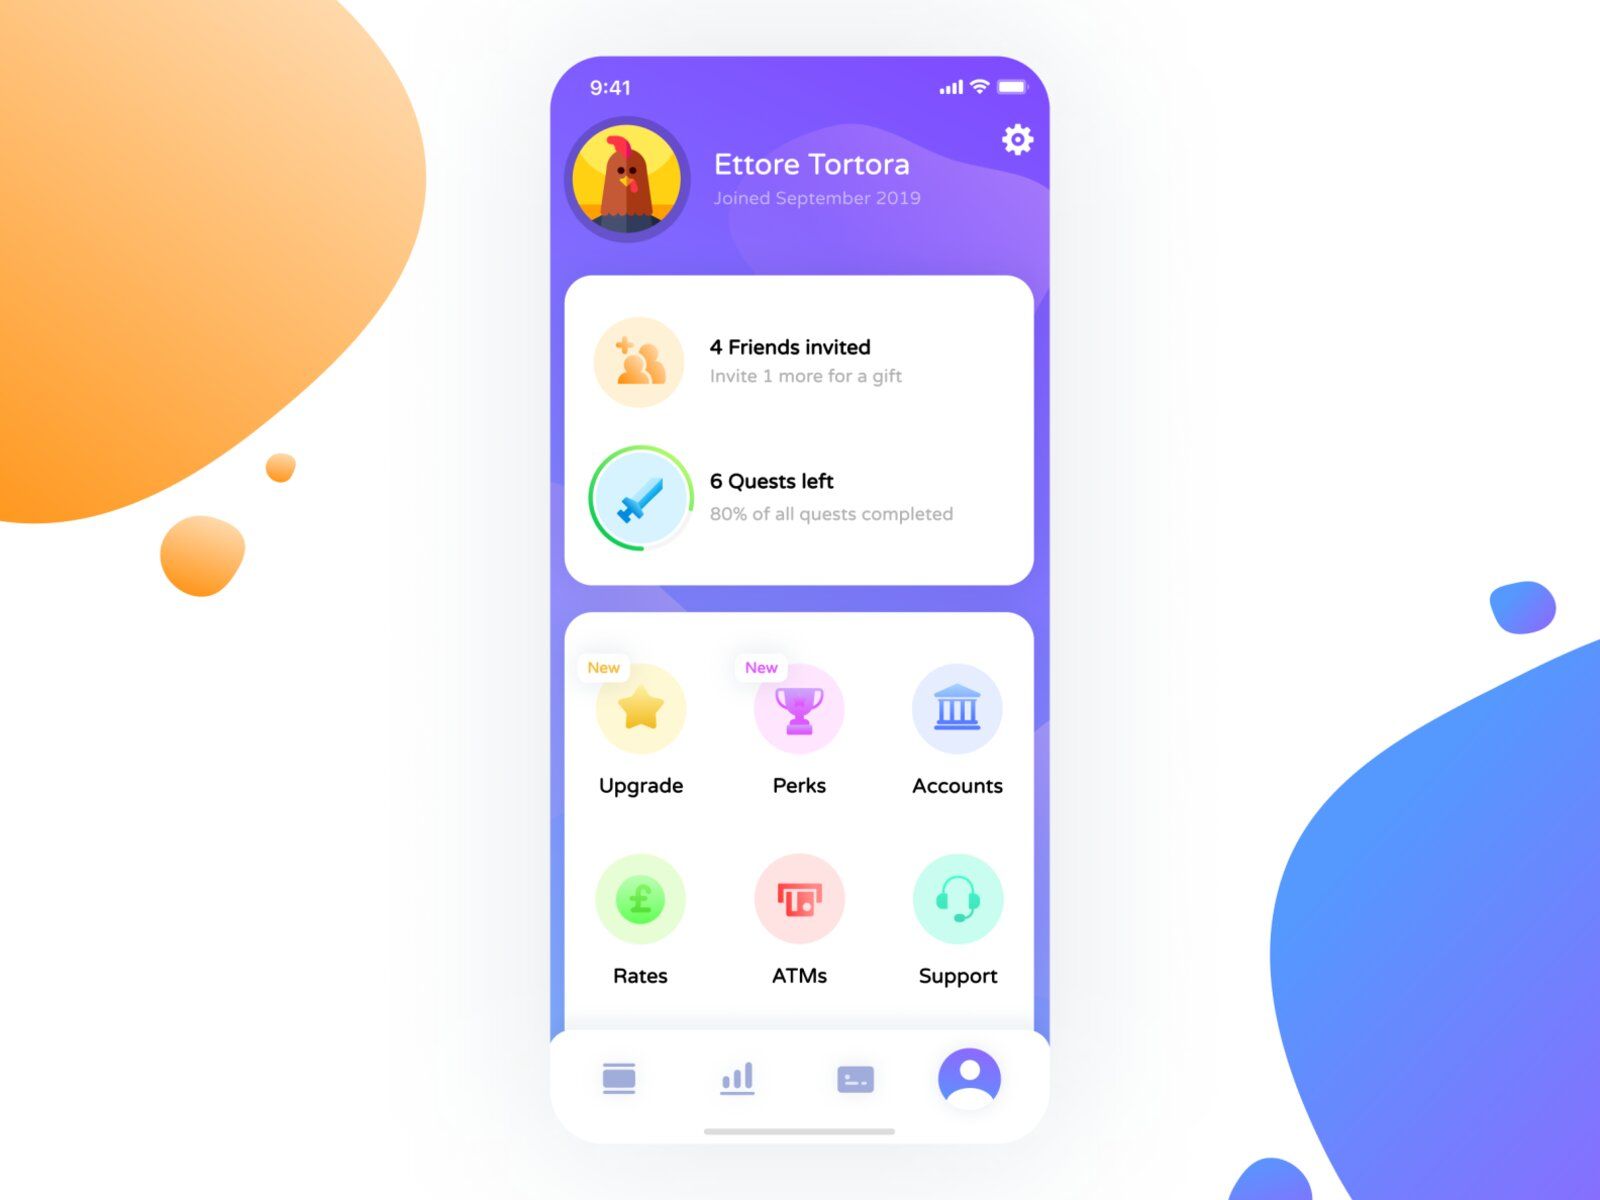 Mobile banking application development for financial institutions or any bank &amp; their services can be improved by such features (*by [Ettore Tortora](https://dribbble.com/ettore){ rel="nofollow" .default-md}*)